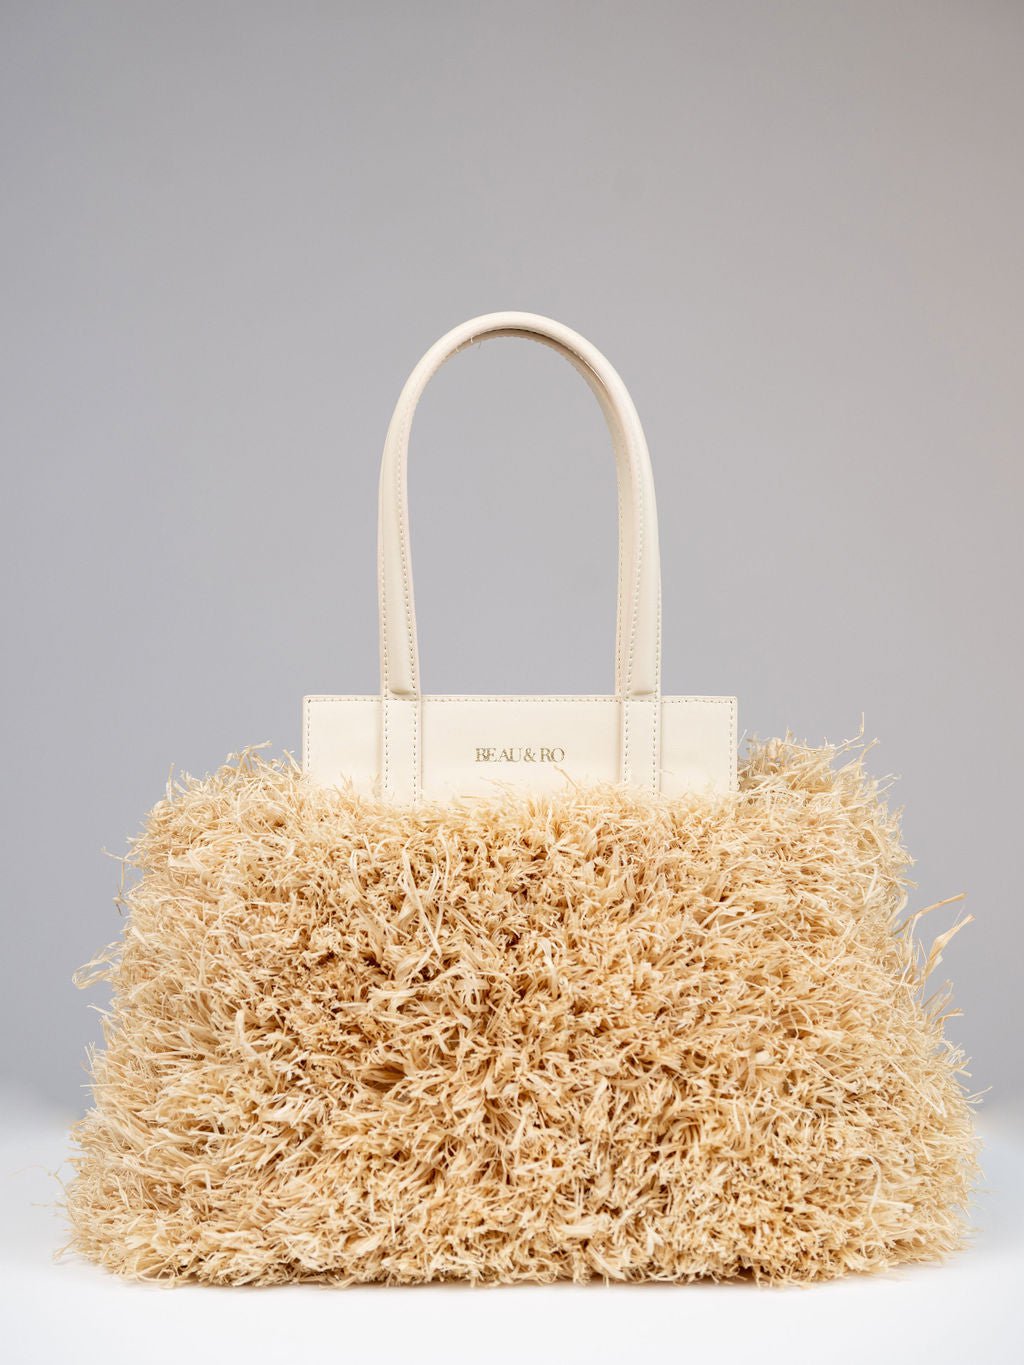 Beau & Ro Clutches Beige / OS The Maroc Collection Fuzzy Purse